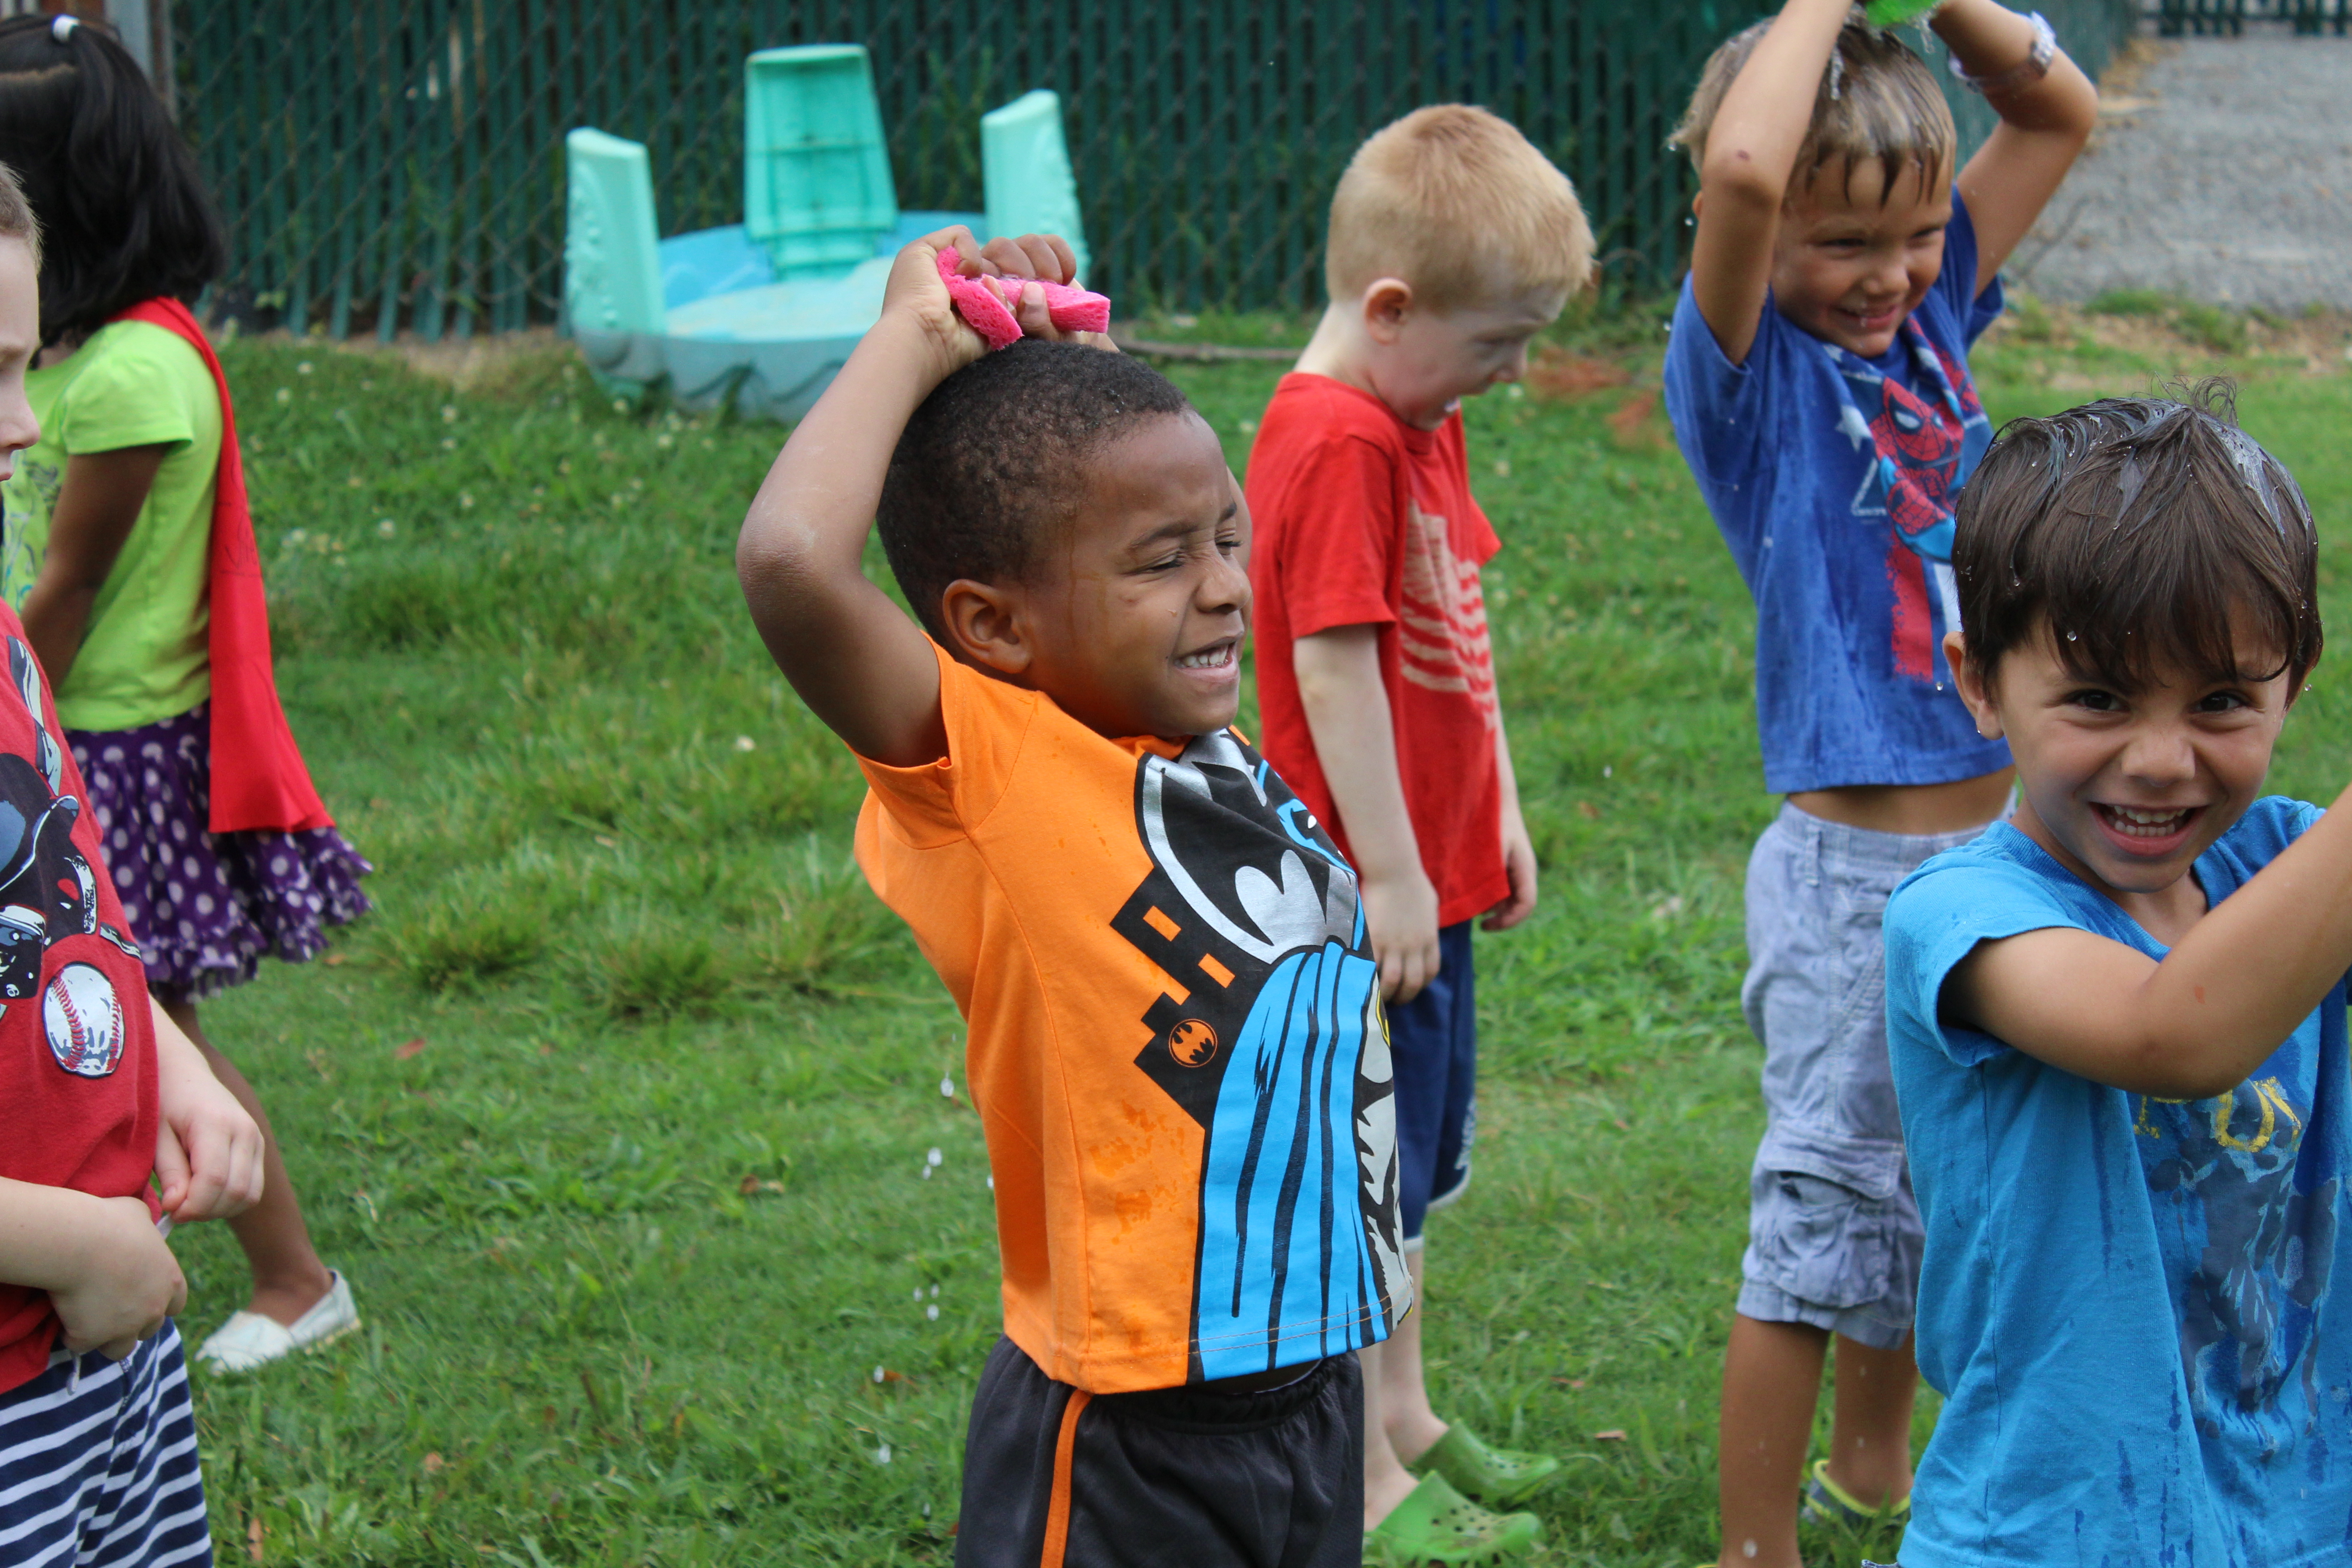 Up, Up and Away! It's Superhero Camp